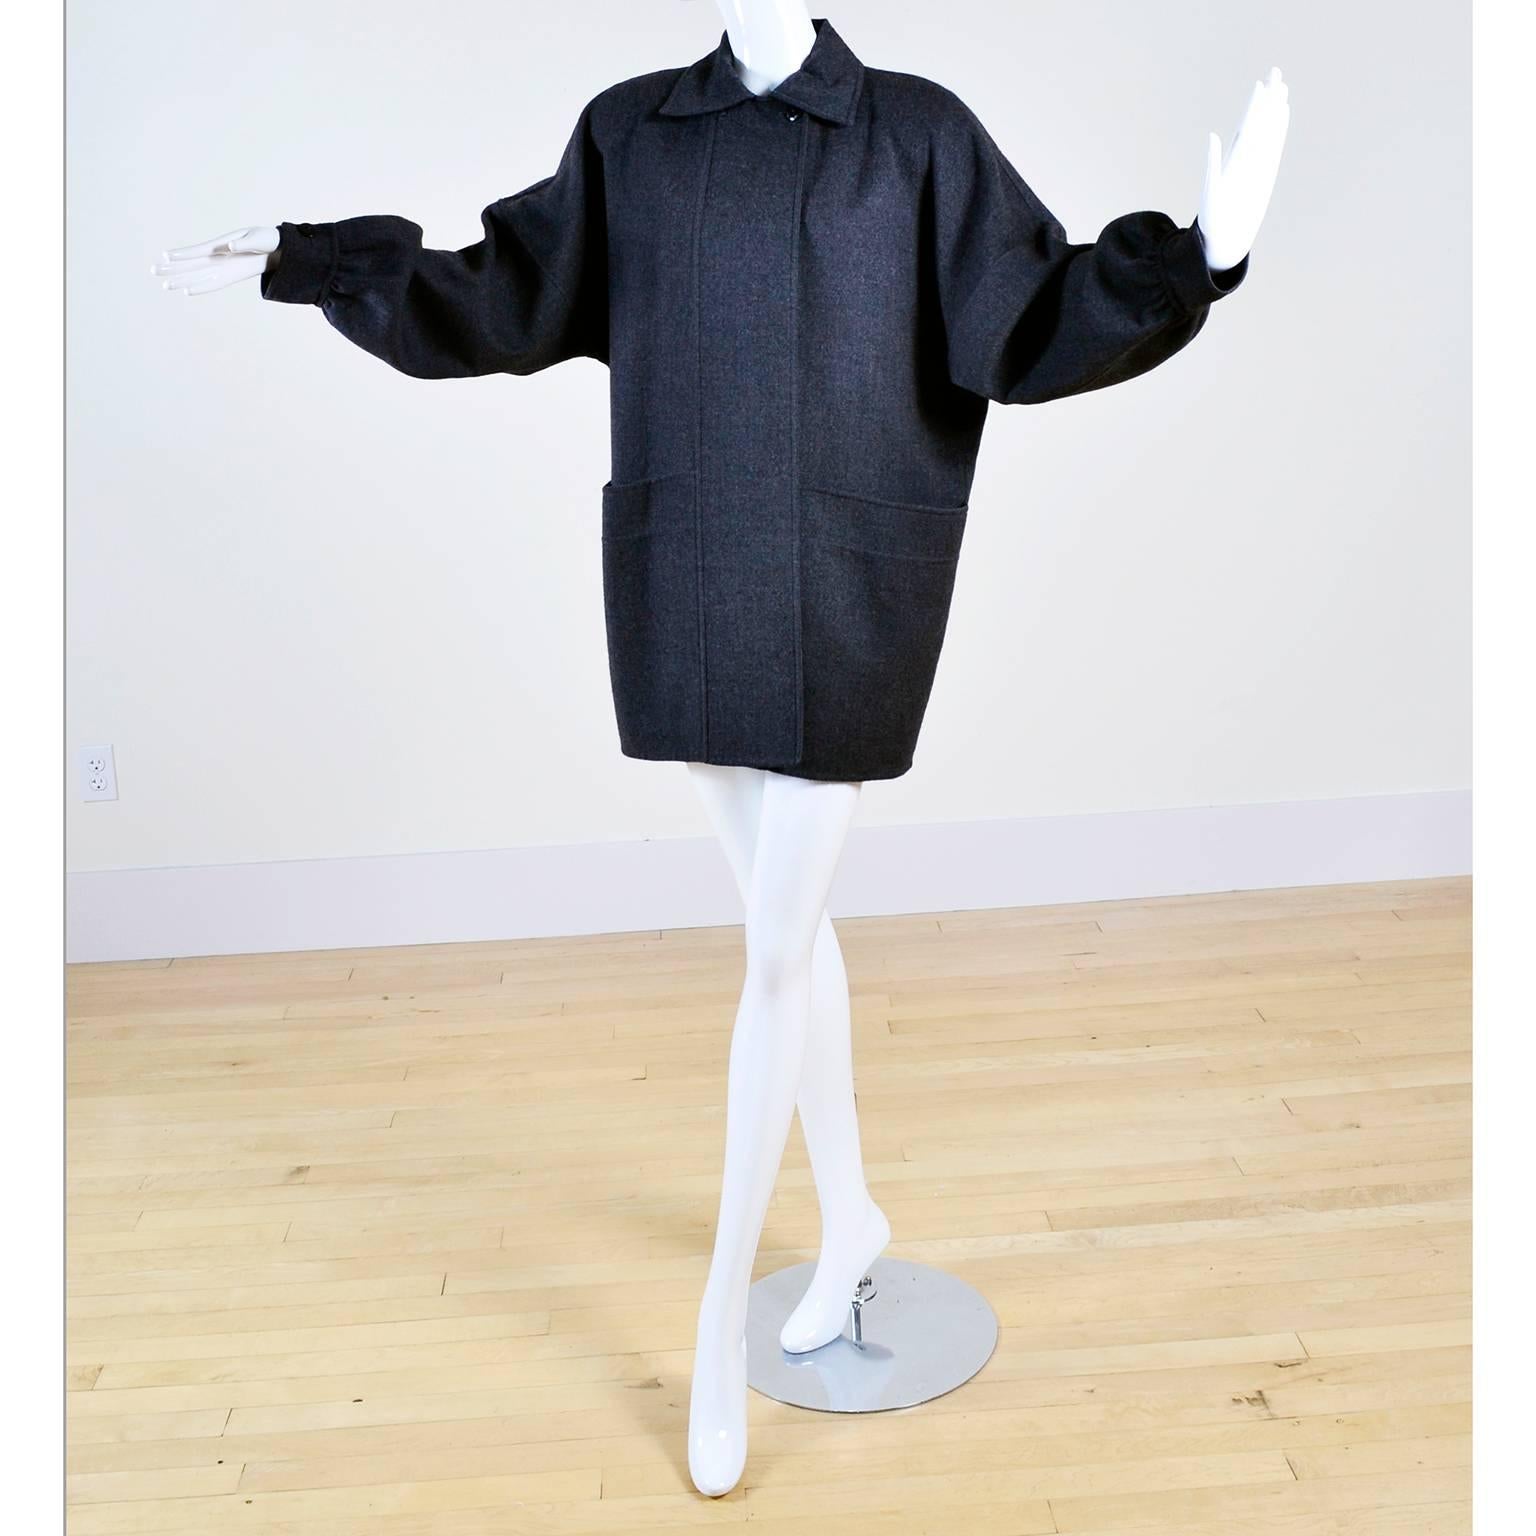 This is a fabulous 1980's Salvatore Ferragamo vintage gray wool jacket with front pockets. This would make a great addition to any Fall and Winter wardrobe!  This versatile coat is from the has that classic 80's oversized fit and puff sleeves.  This